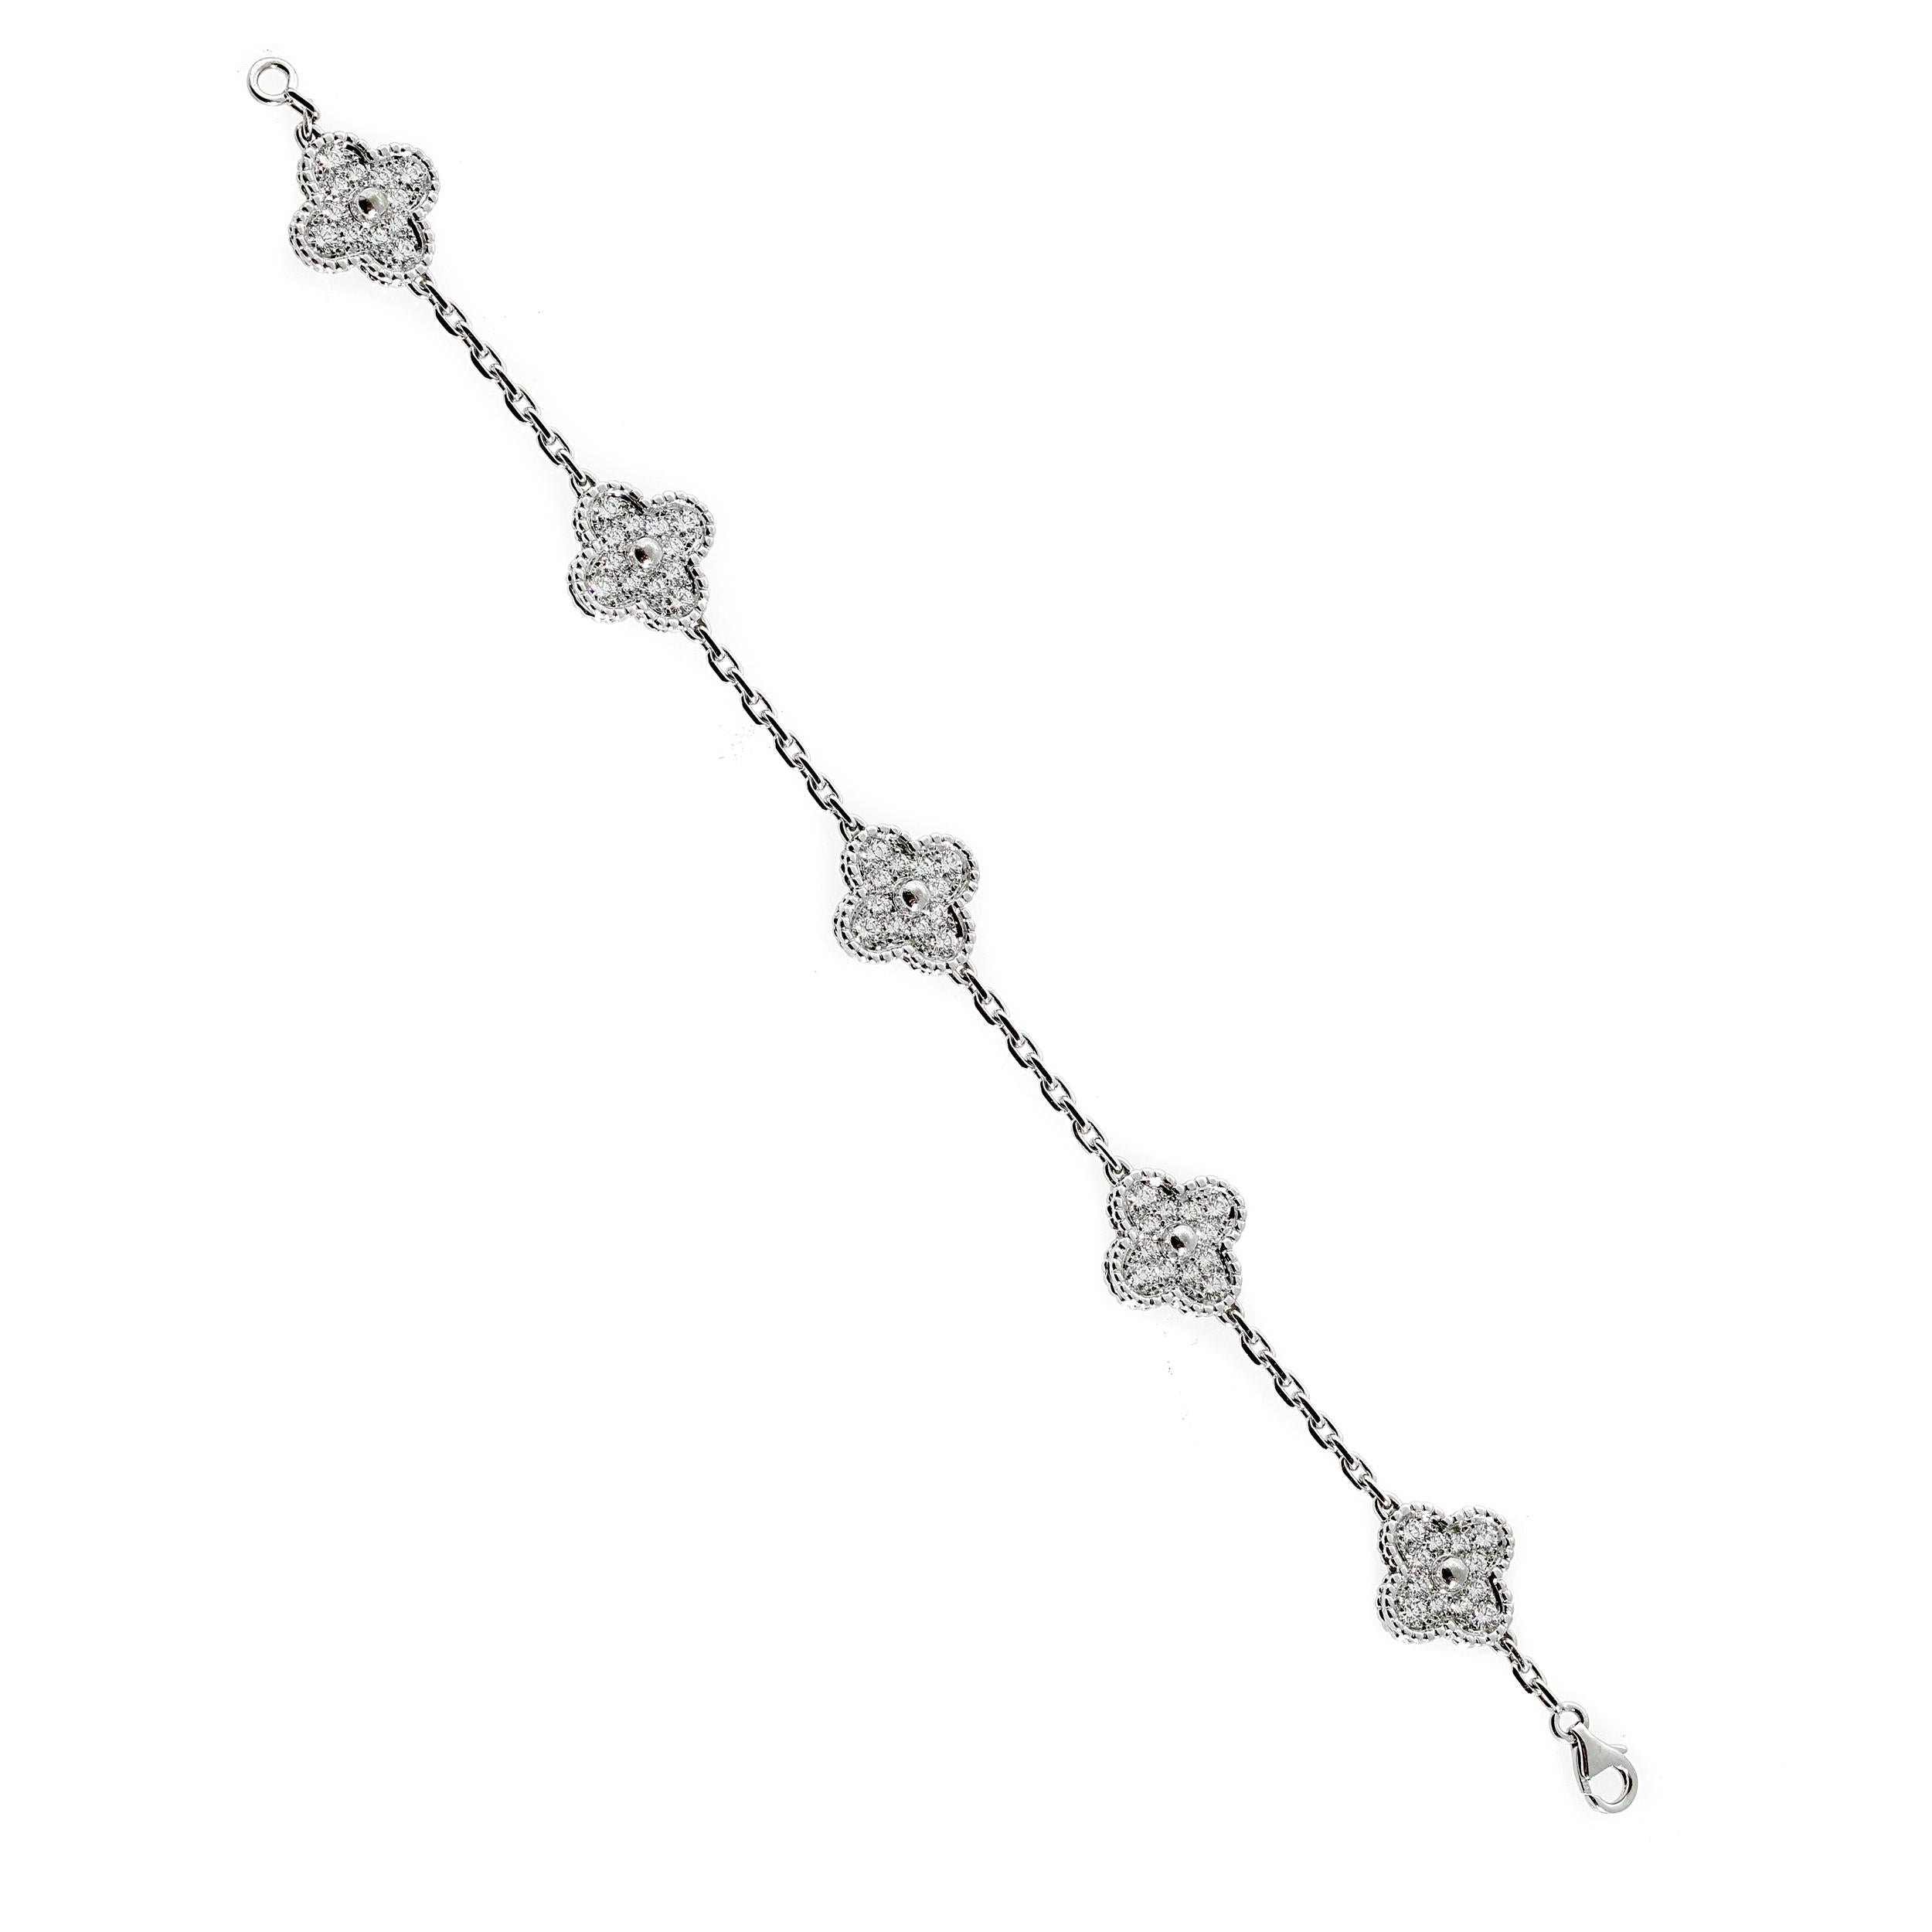 An iconic Van Cleef & Arples Vintage Alhambra bracelet adorned with round brilliant cut diamonds, The bracelet has a total ct weight of 2.42ct in the finest original Van Cleef & Arpel diamonds.